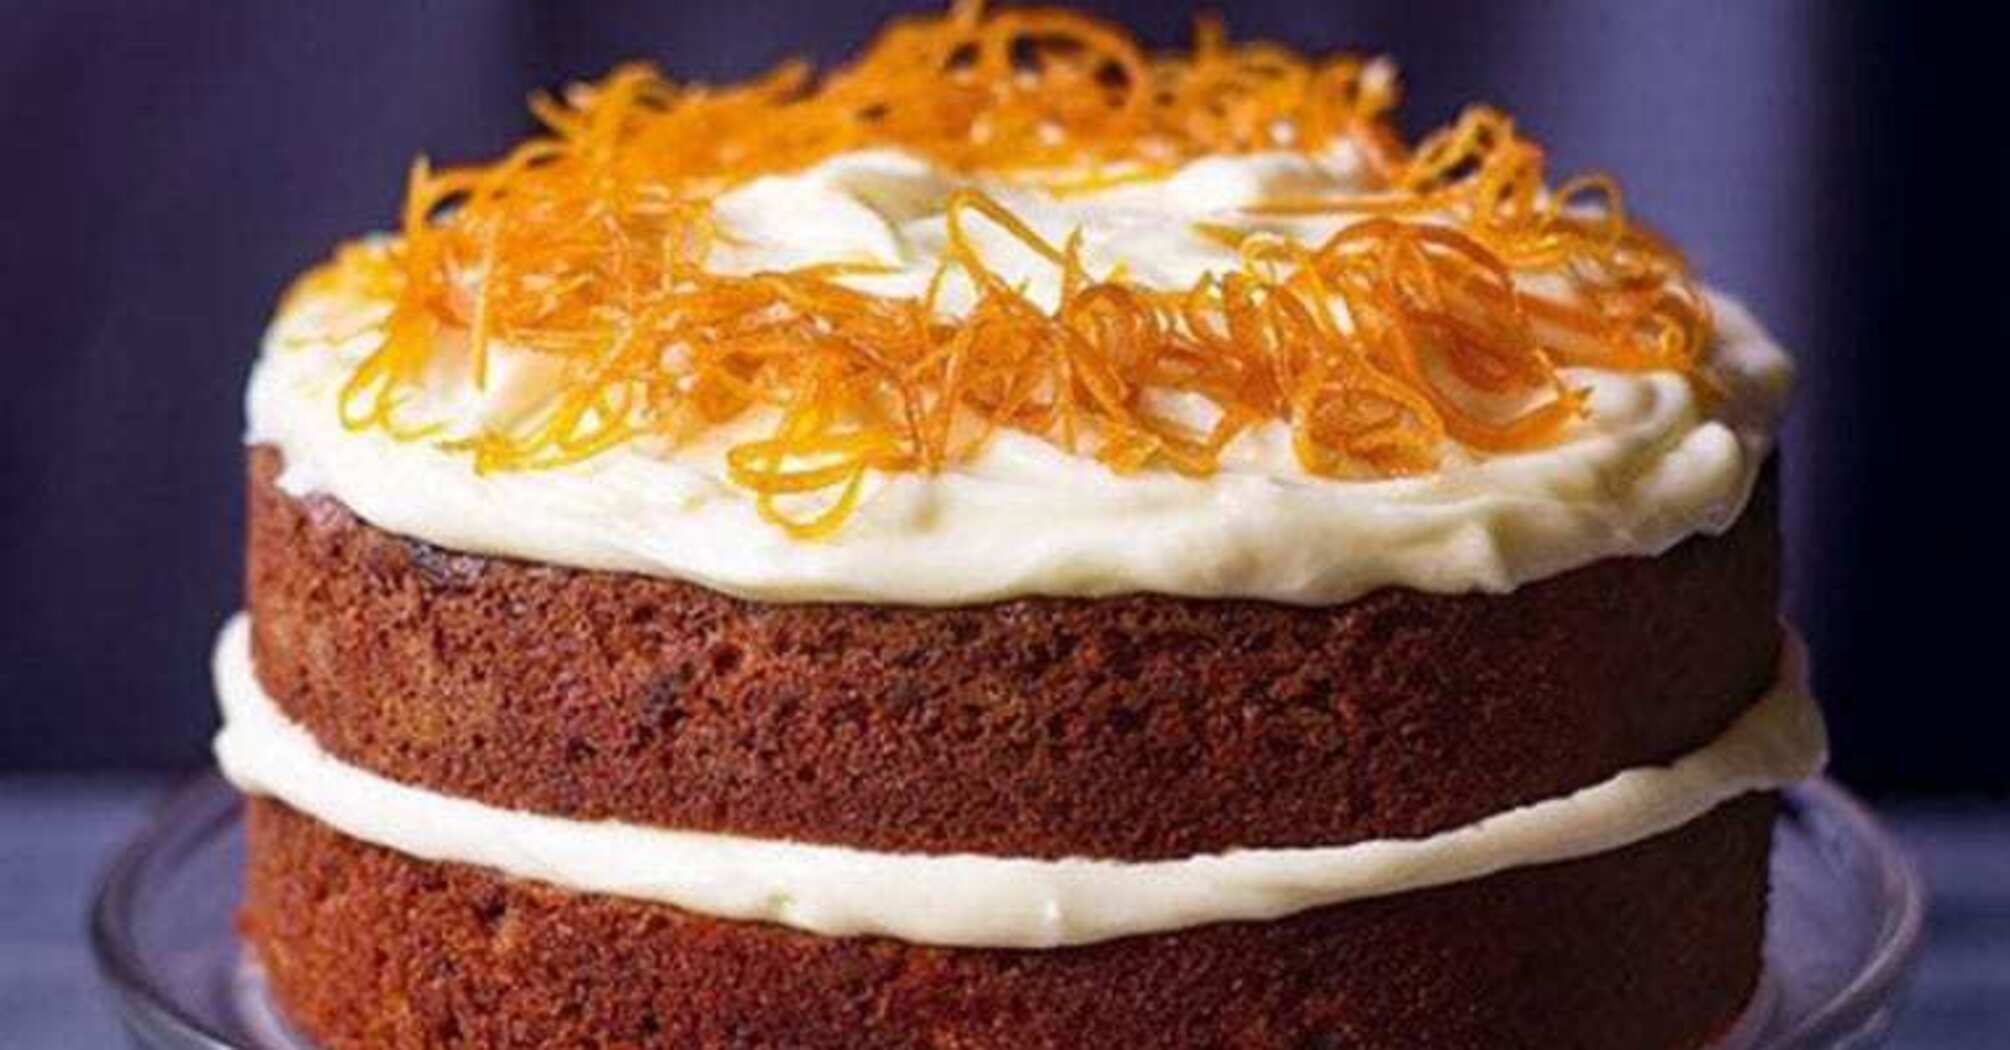 Sweet carrot cake: it turns out to be very fluffy and tender